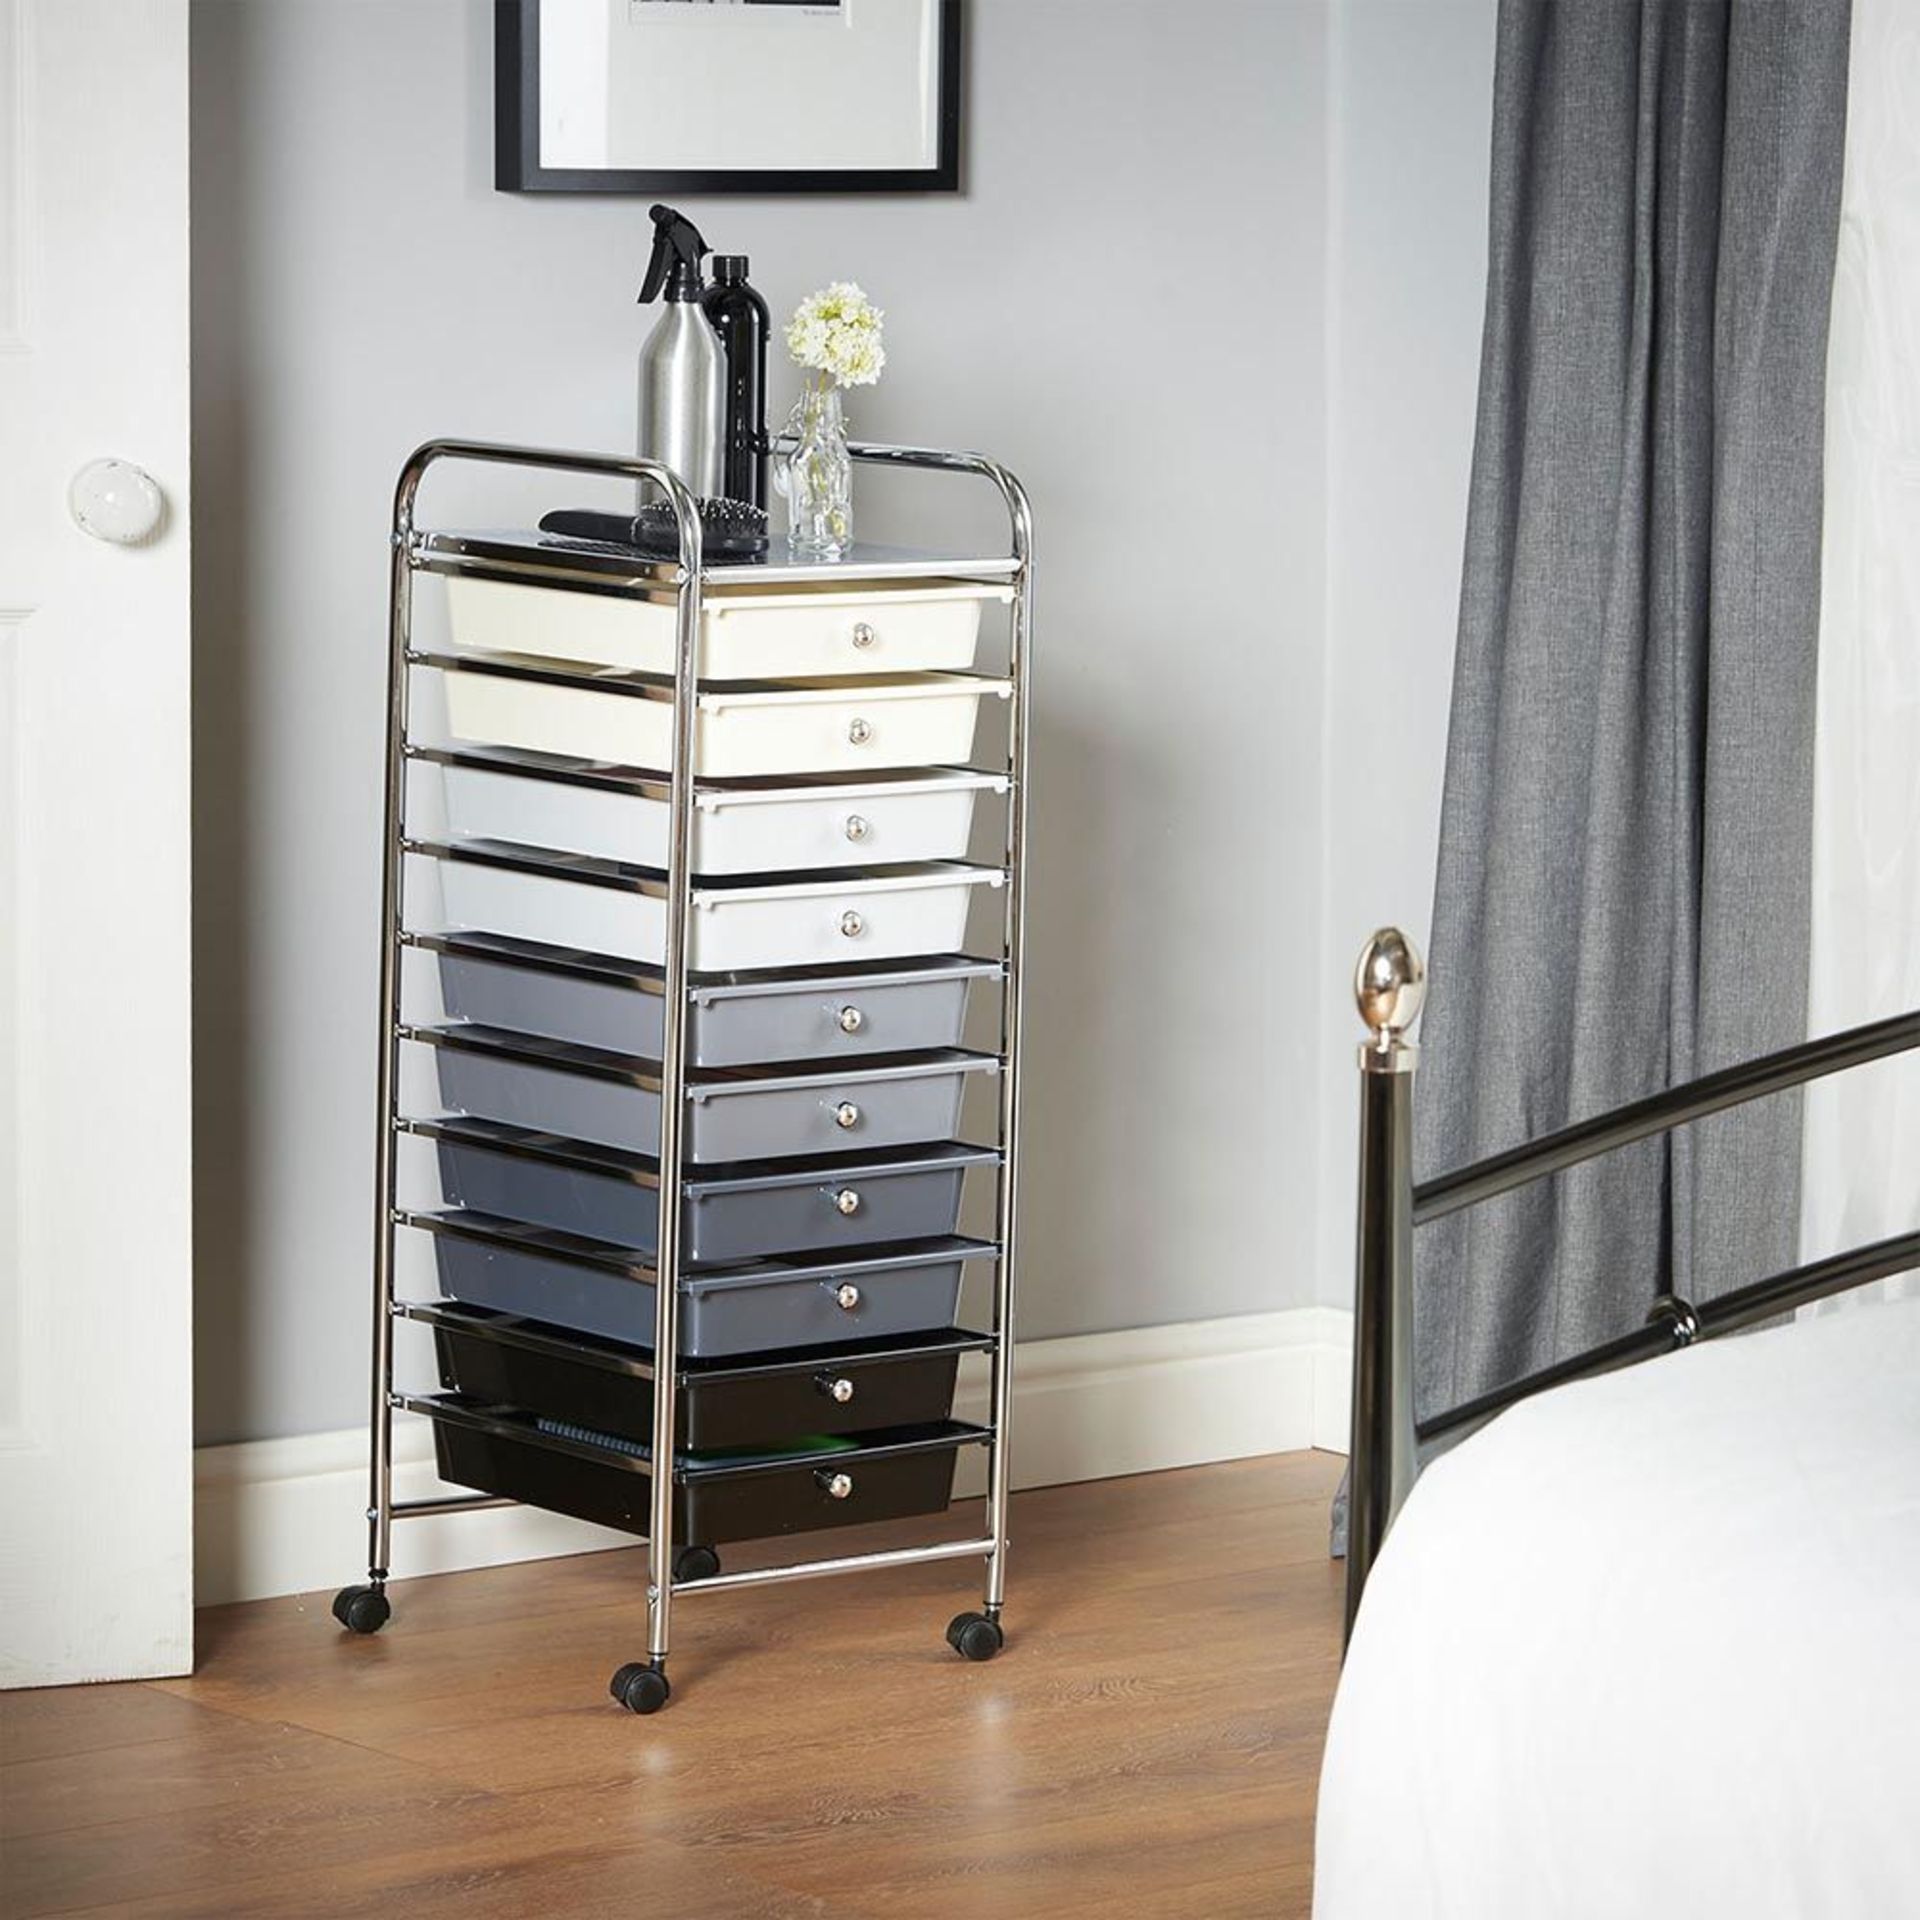 (KG16) Ombre 10 Drawer Trolley. Great for homes, offices, beauty salons and more! Each drawer ...